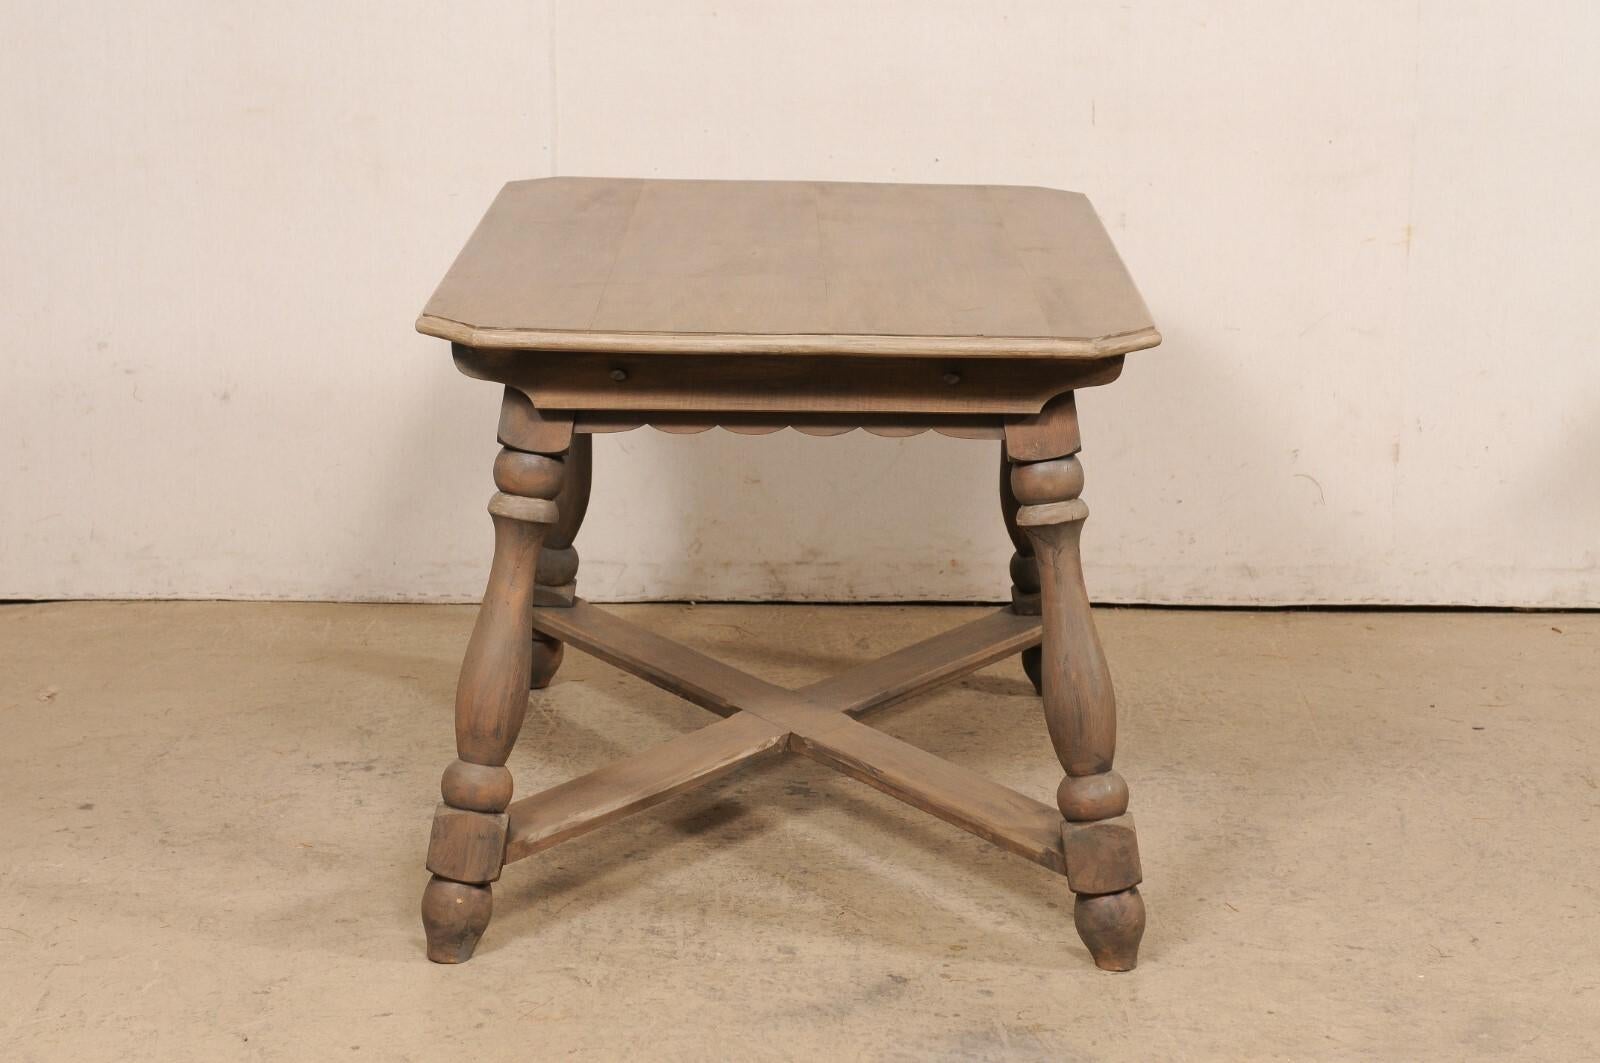 European Wooden Table w/Scalloped Apron, Nicely Turned Legs & X-Stretcher For Sale 5